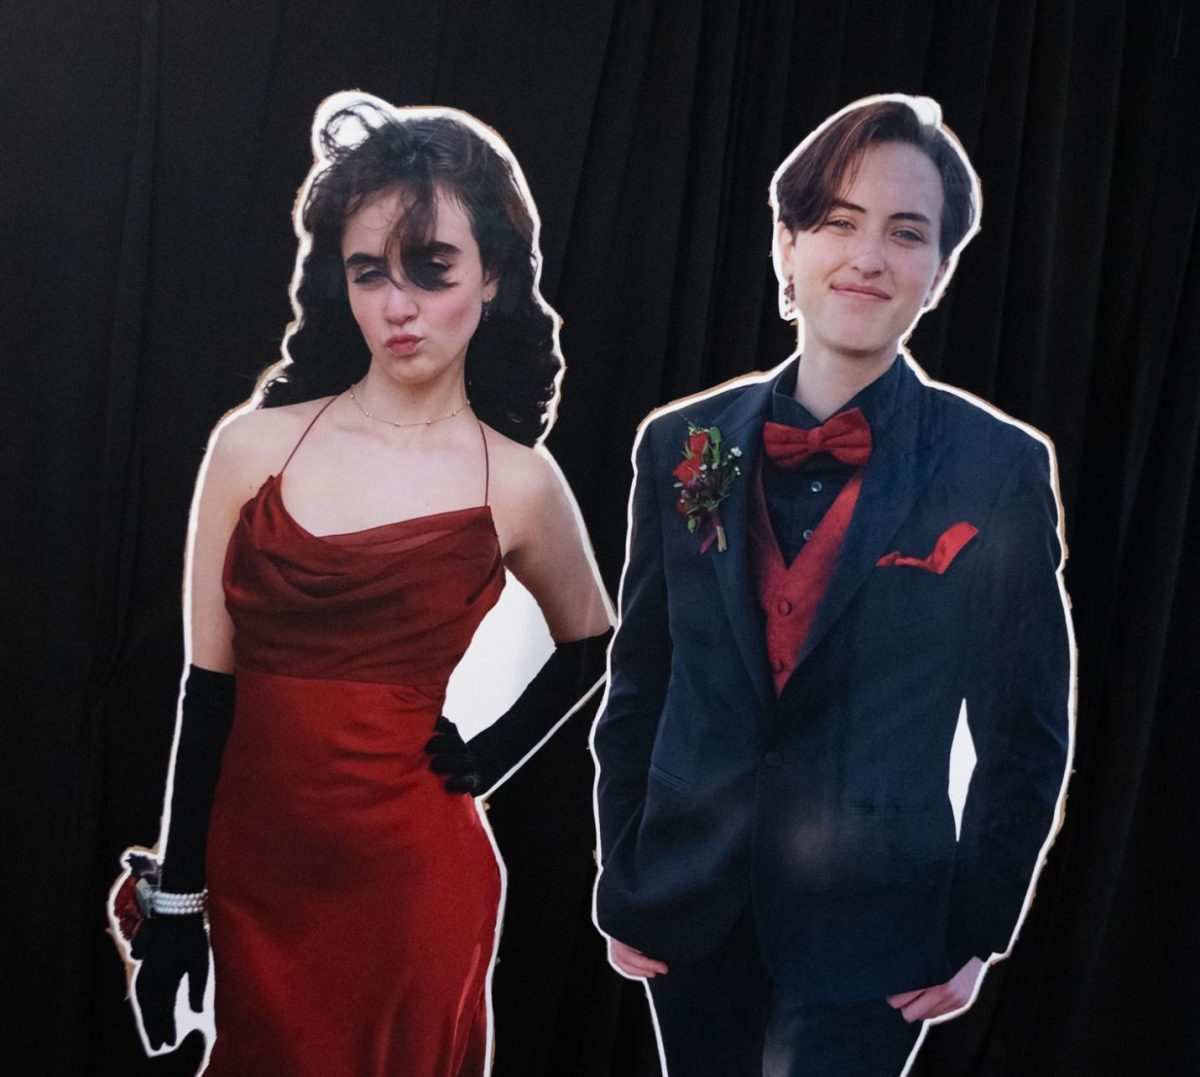 Many participants dressed up for the event’s red carpet. Ash Gensel and Lily Halac were not able to make it to the award show, so their siblings brought cardboard cutouts of the two. 
